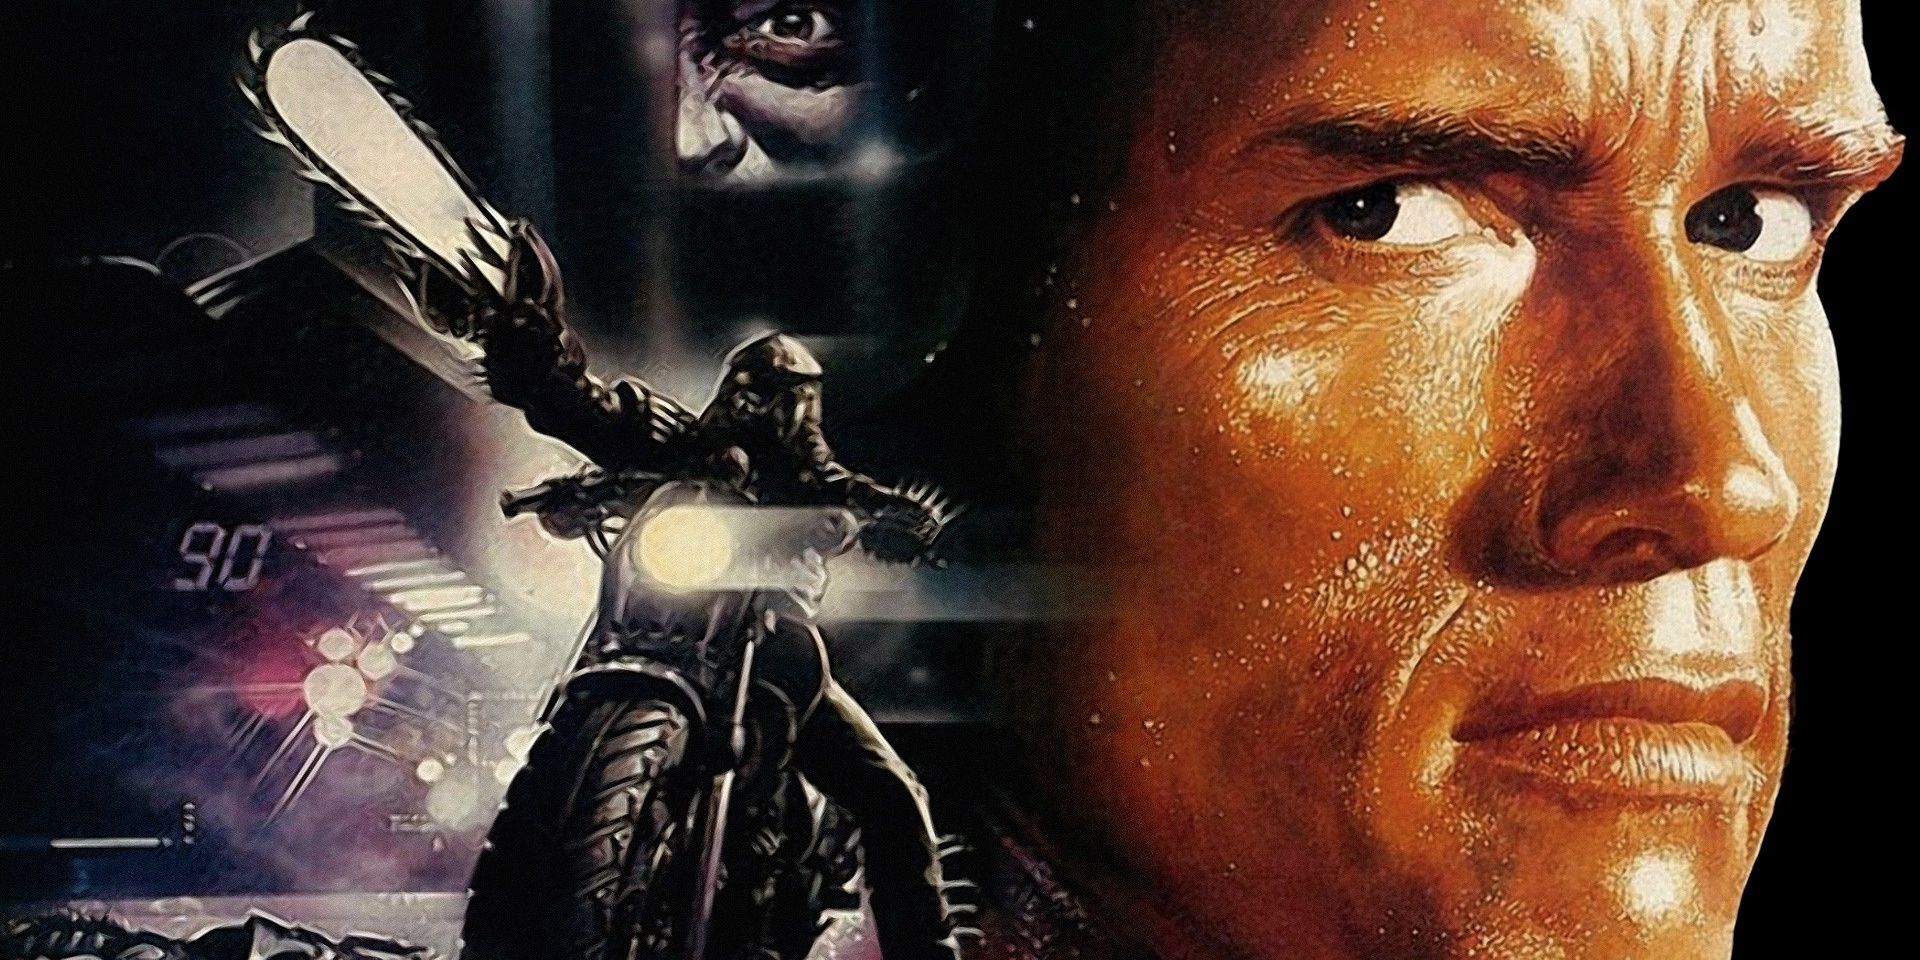 Arnold Schwarzenegger on the Running Man poster with a chainsaw wielding motorcyclist